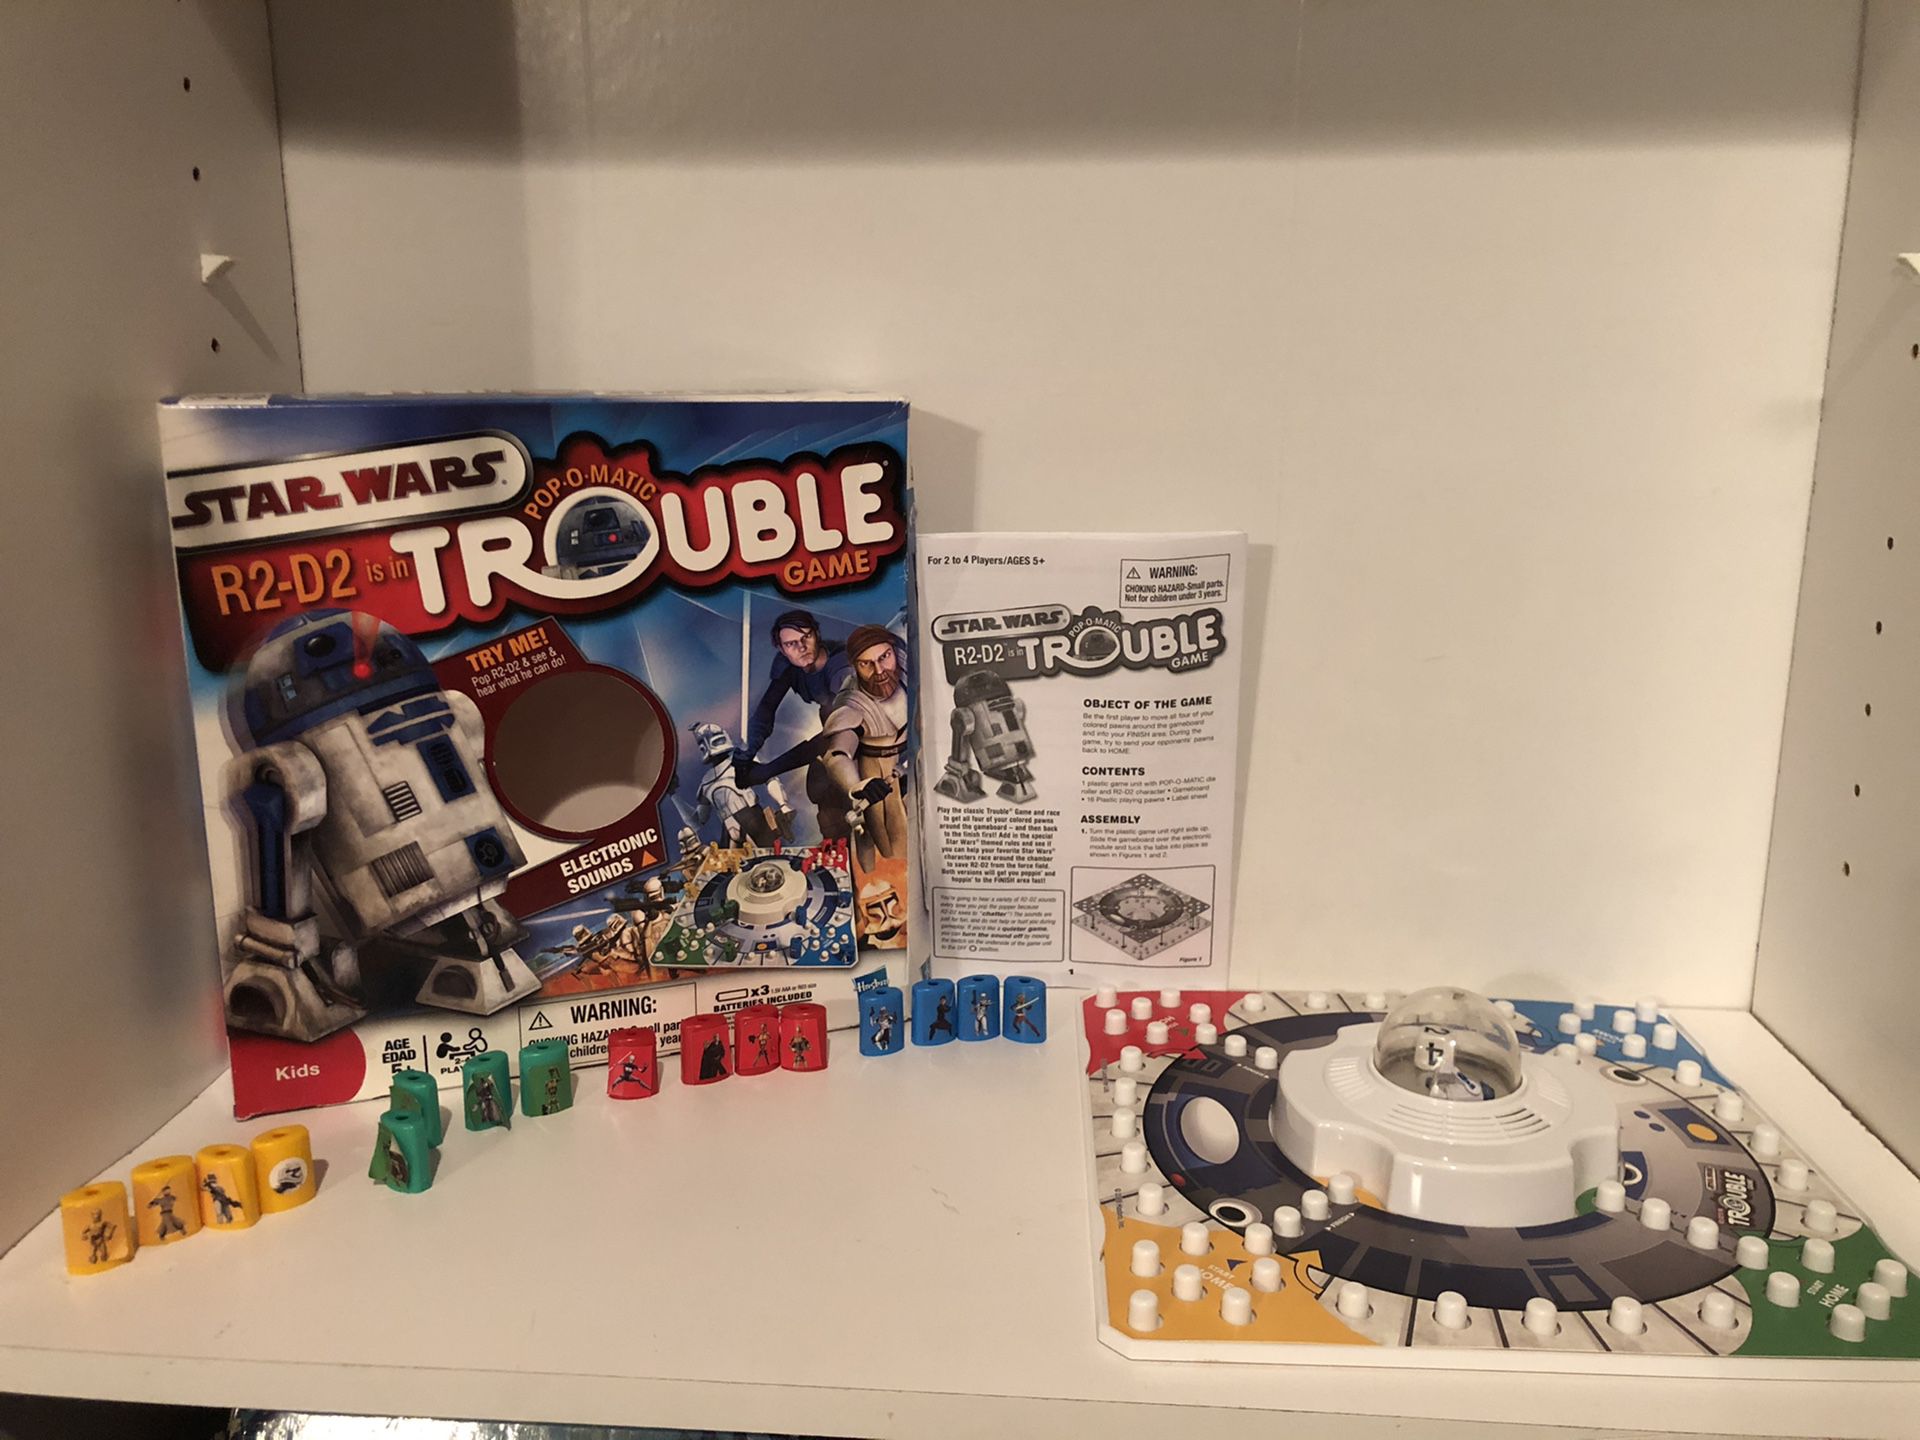 Star Wars R2-D2 in Trouble pop o matic trouble board game for kids and adults! 2009